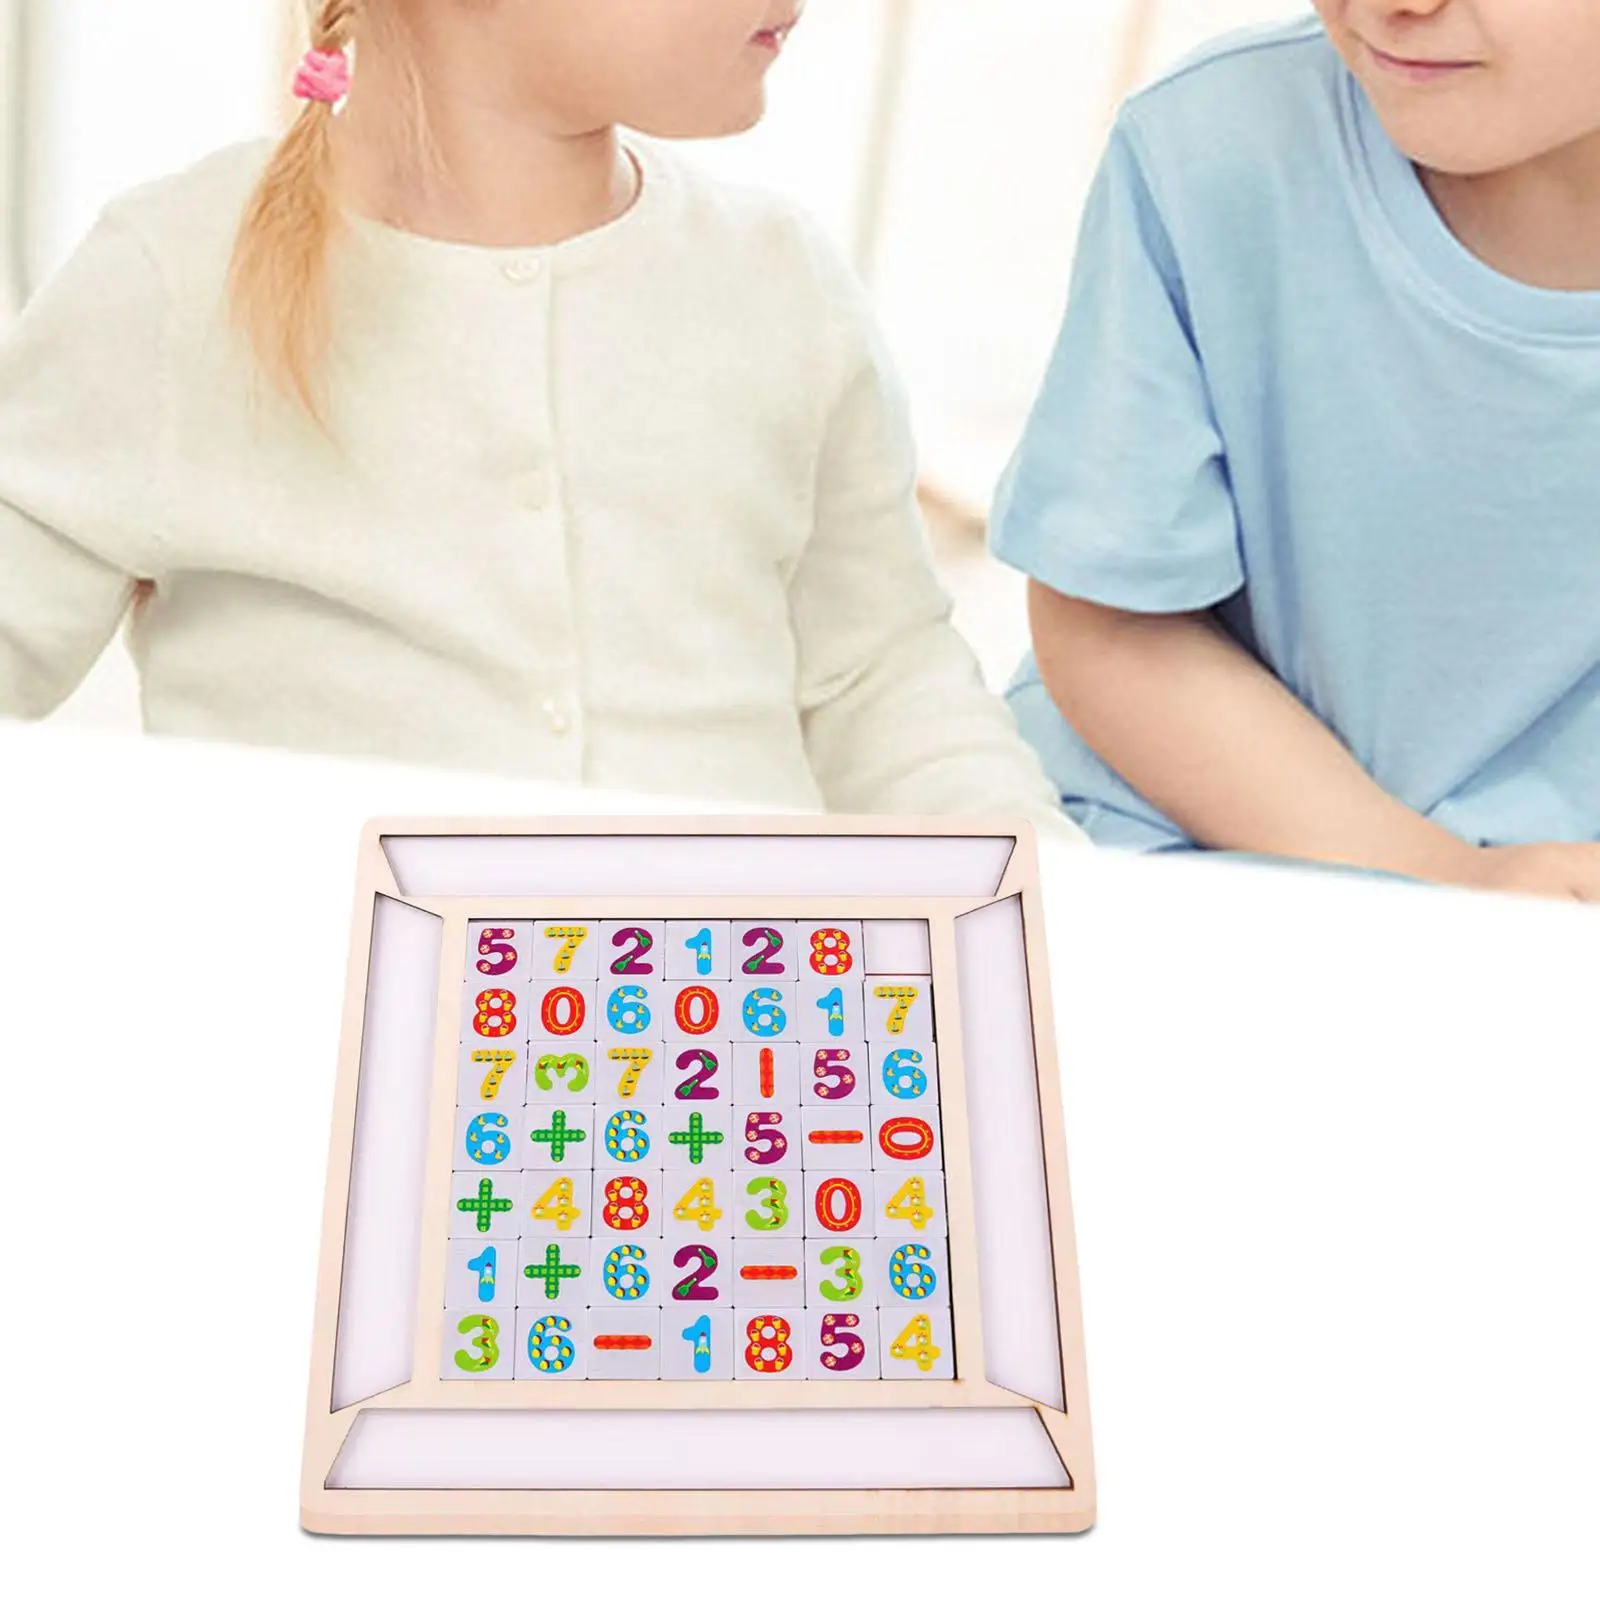 Children Matching Game Blocks Toy Educational Toy for Ages 3+ Kids Toddler